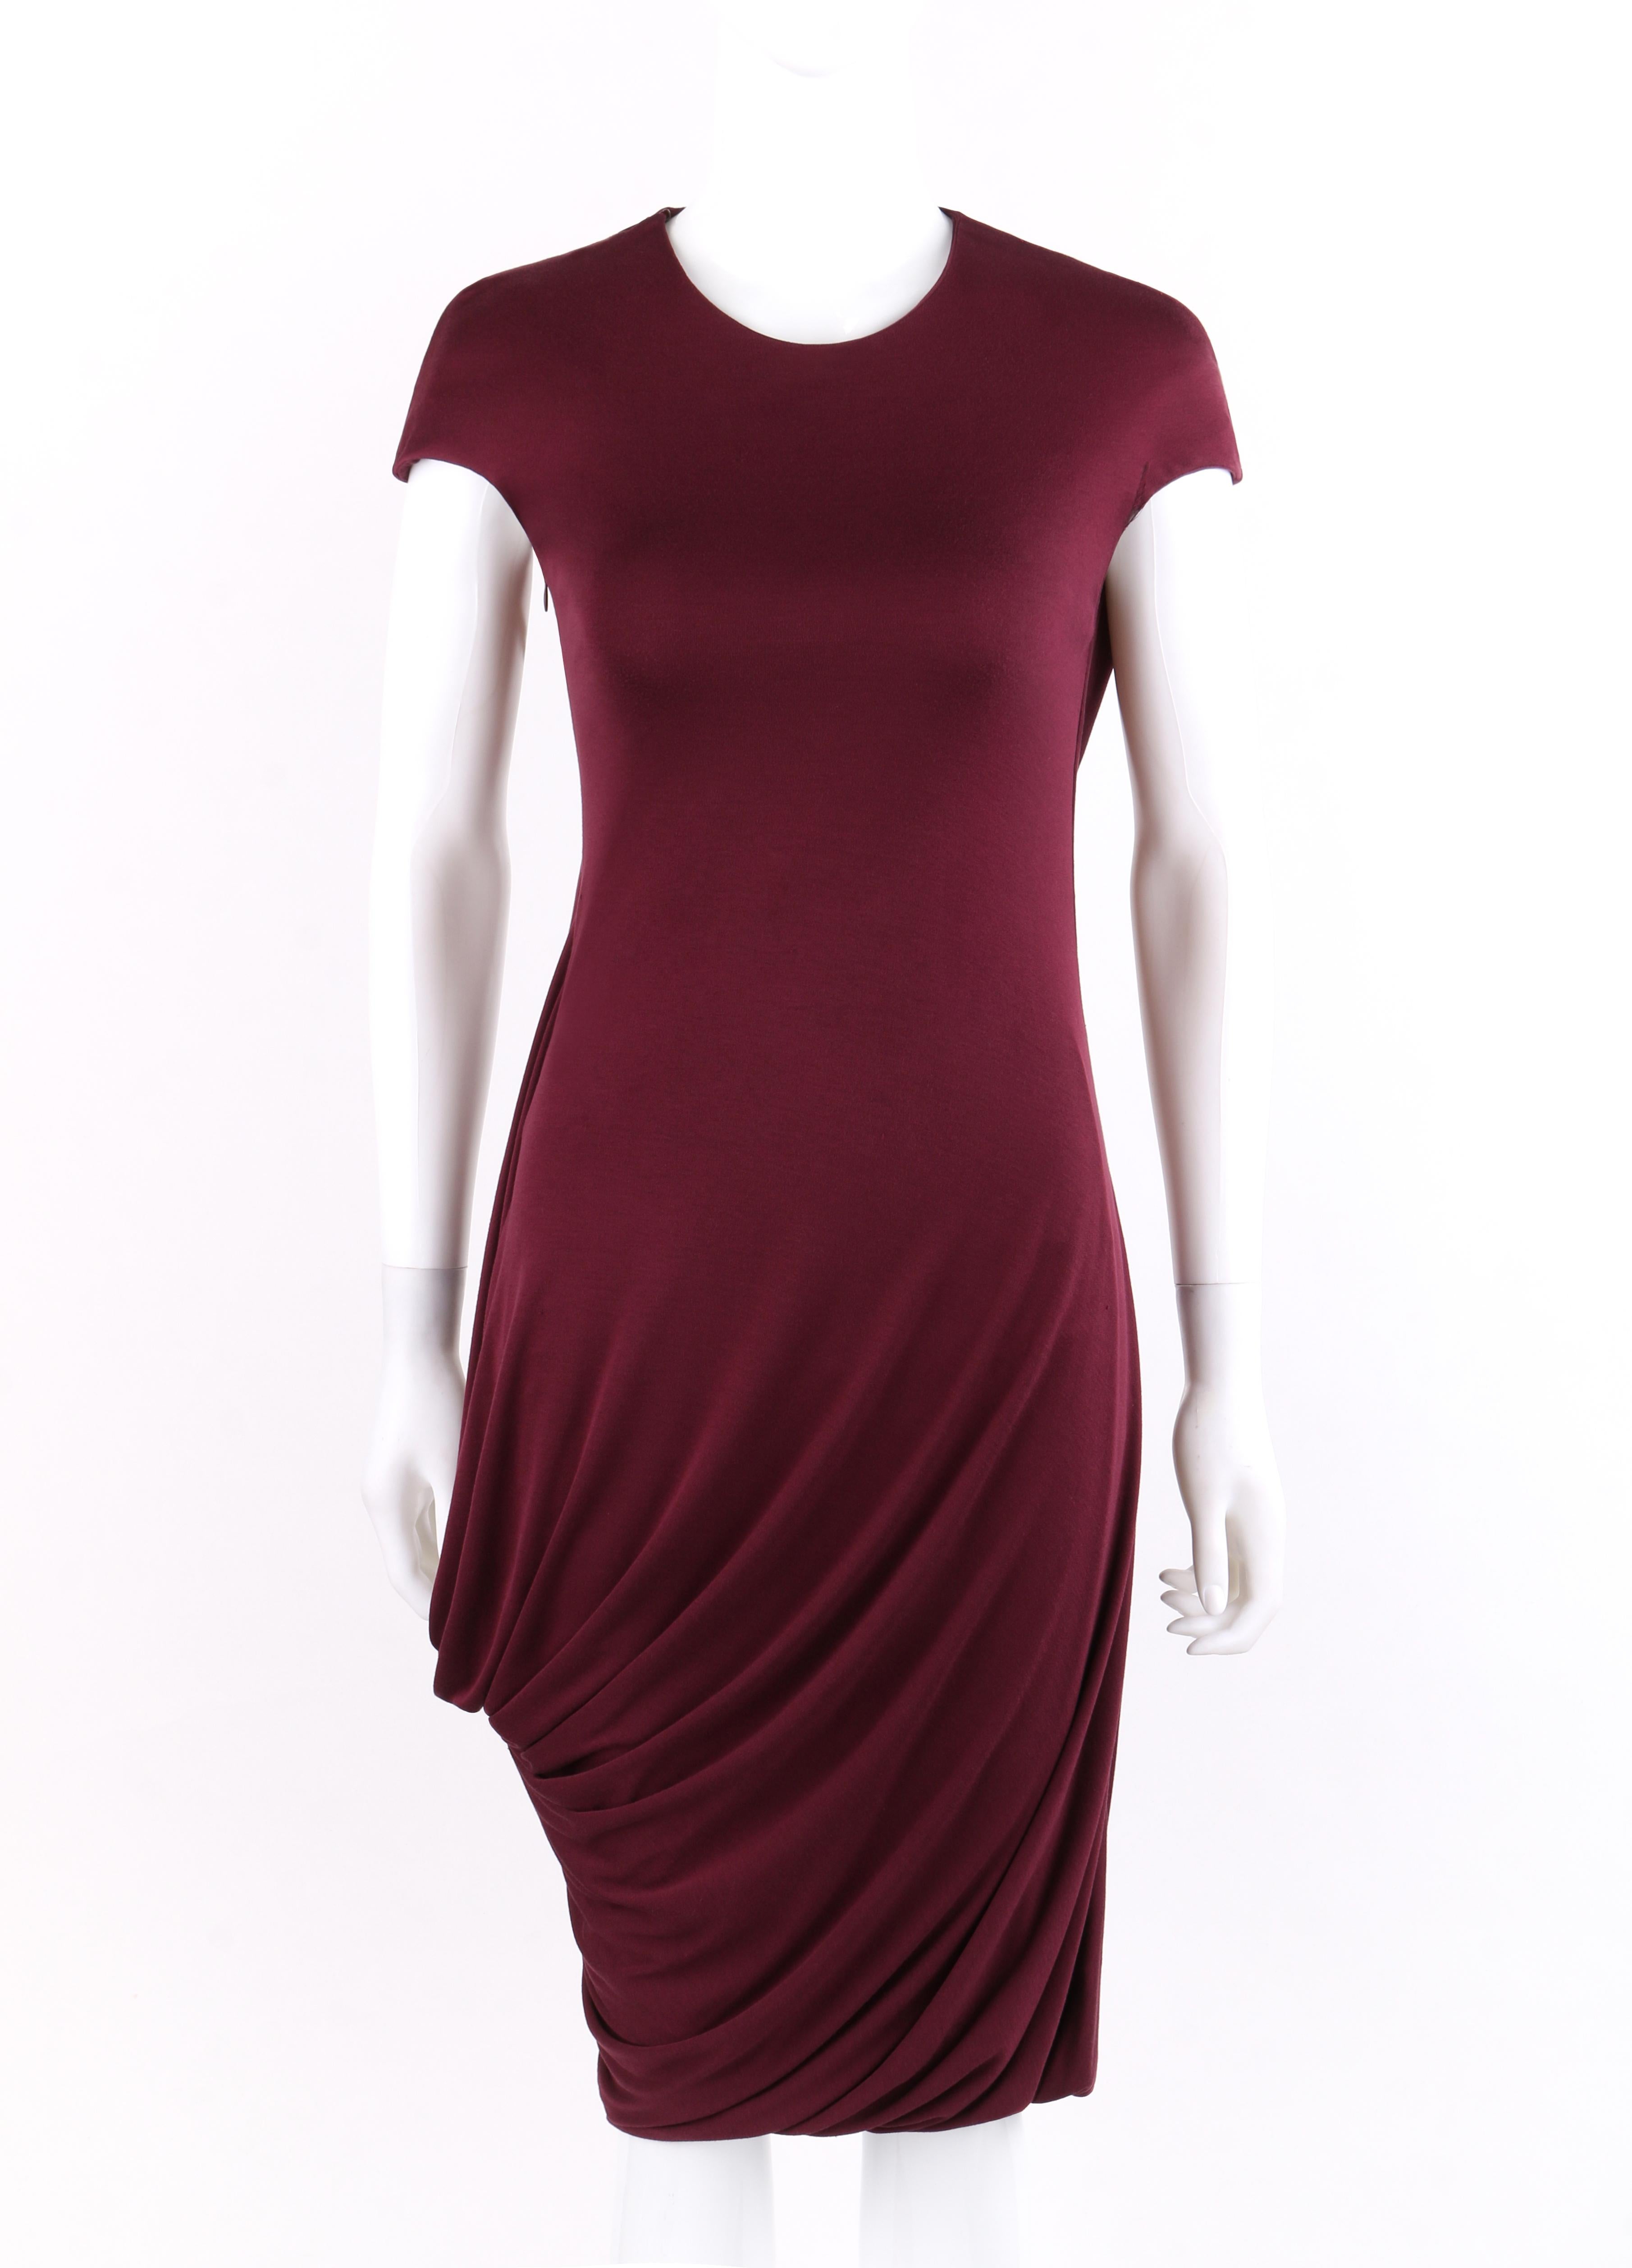 ALEXANDER McQUEEN A/W 2009 Burgundy Asymmetrical Draped Midi Dress
 
Brand / Manufacturer: Alexander McQueen 
Collection: Autumn / Winter 2009
Style: Midi dress
Color(s): Burgundy
Lined: Yes      
Marked Fabric Content: Composition: Rayon Viscose;